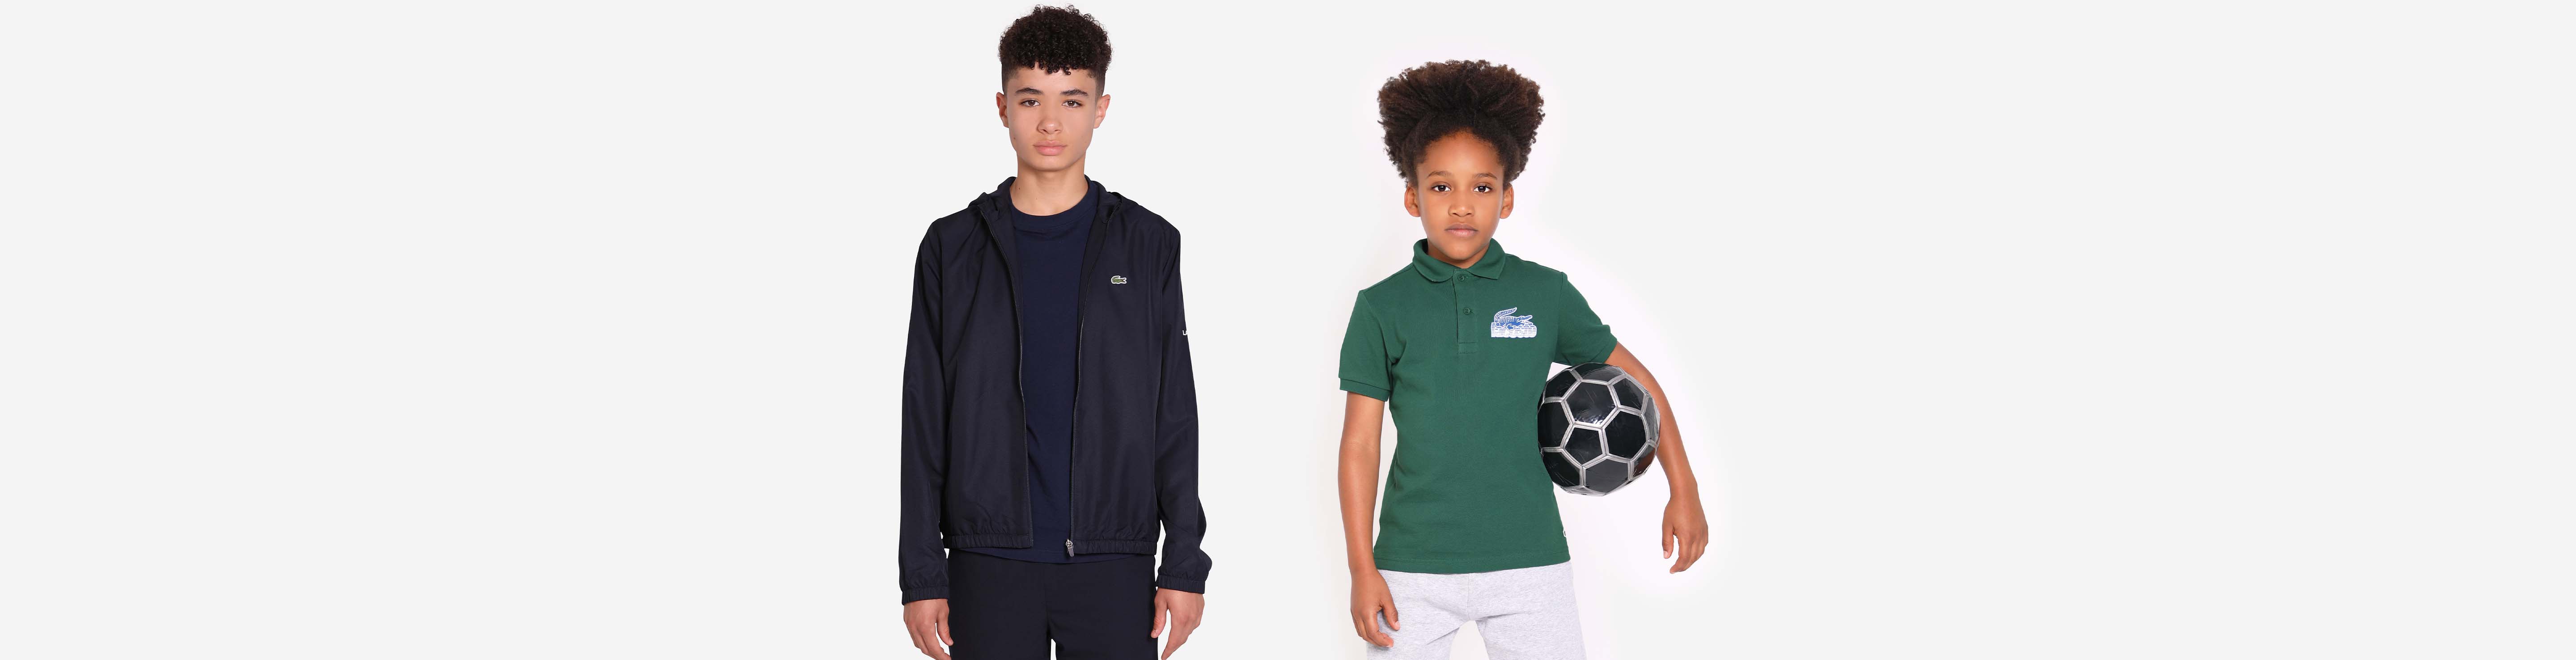 Lacoste Childsplay | Clothes US Kids Clothing